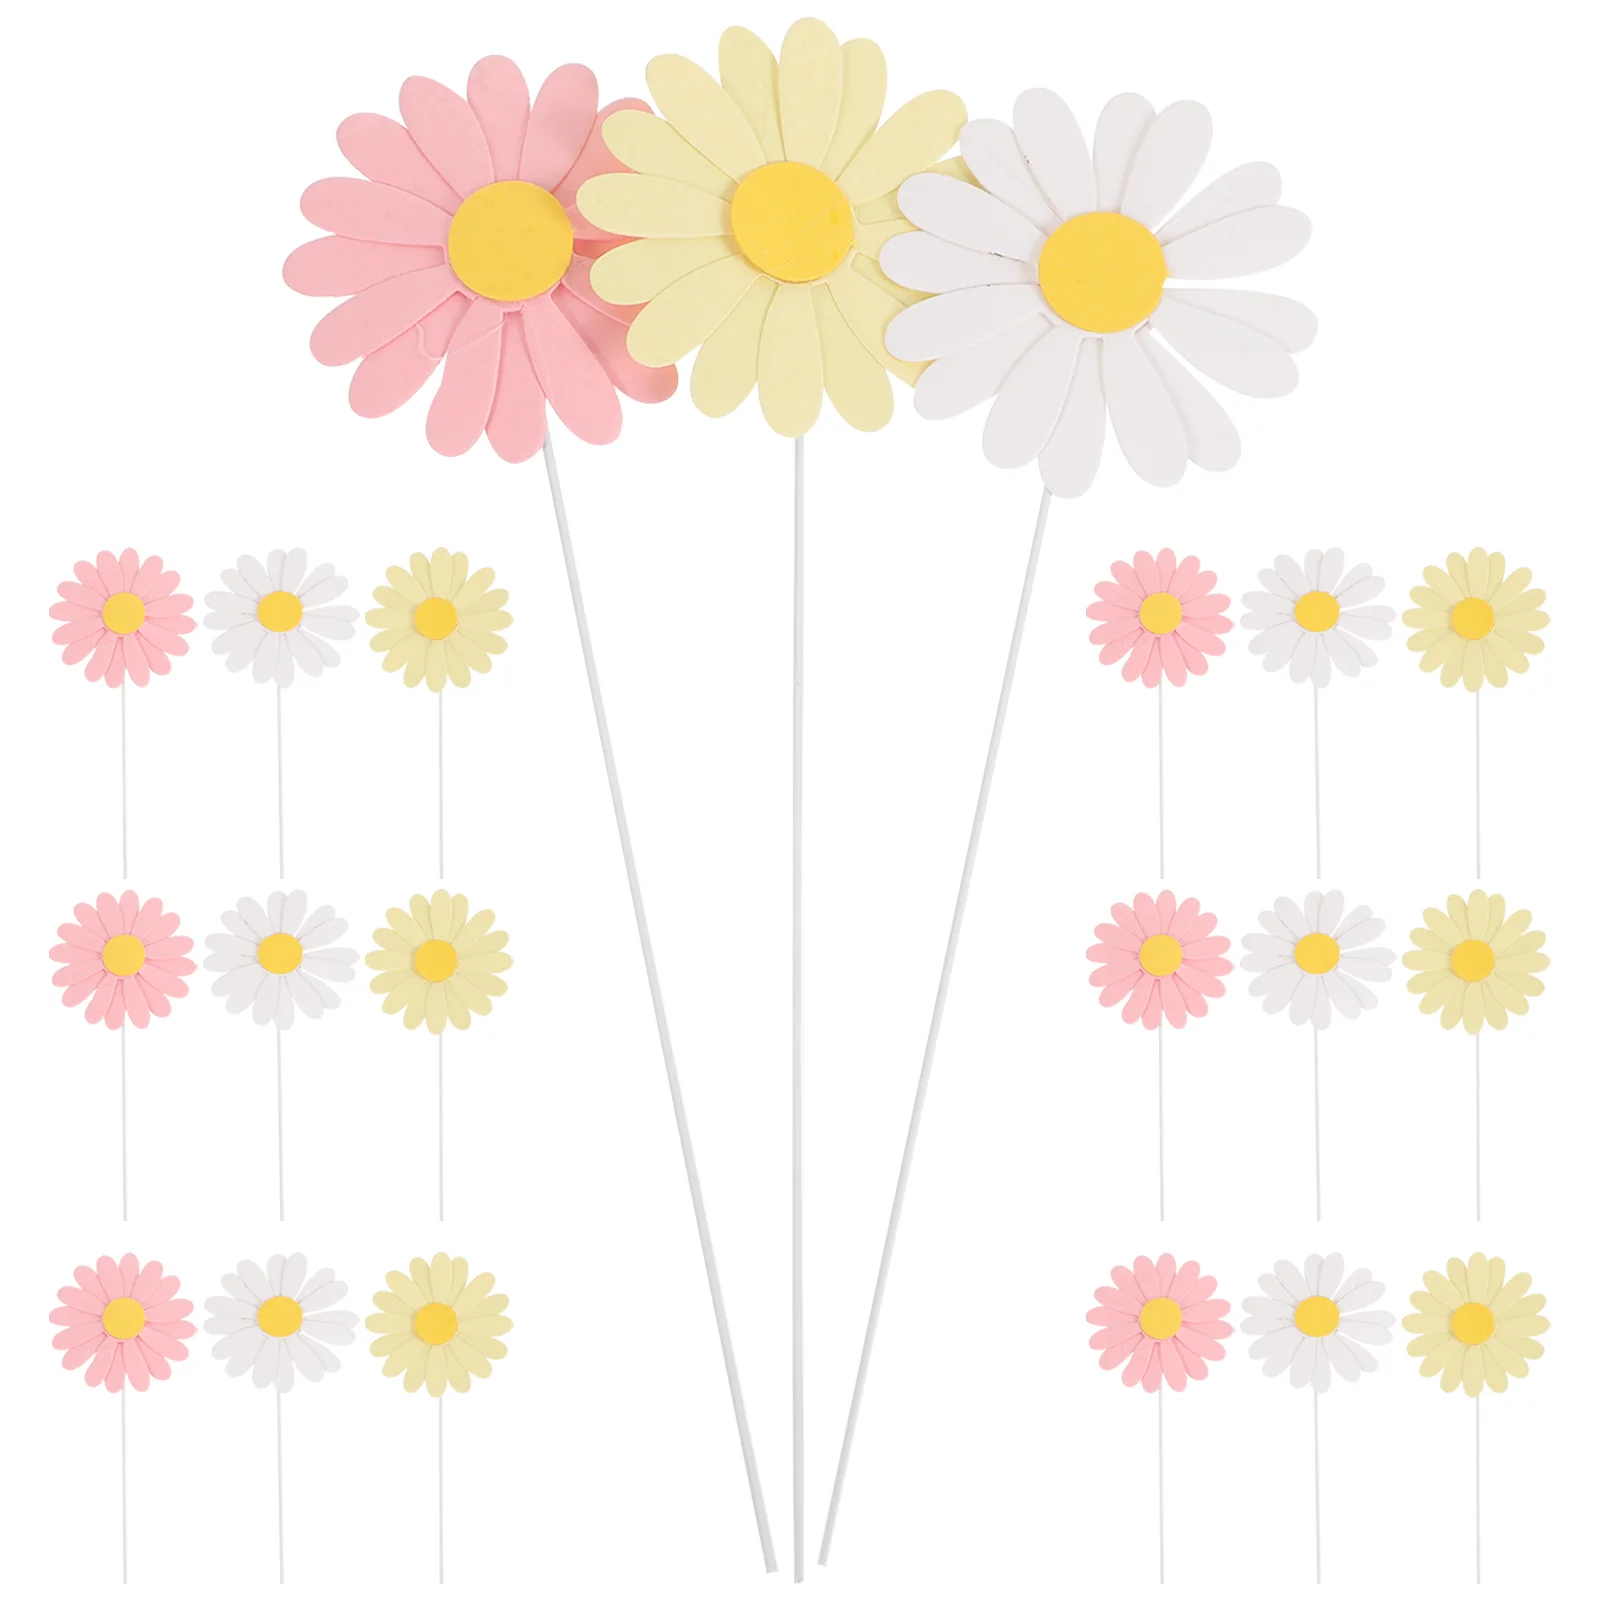 

30 Pcs Wedding Ceremony Decorations Daisy Cake Toppers Floral Cupcake Dessert Table Flower Paper Picks Party Baby Birthday